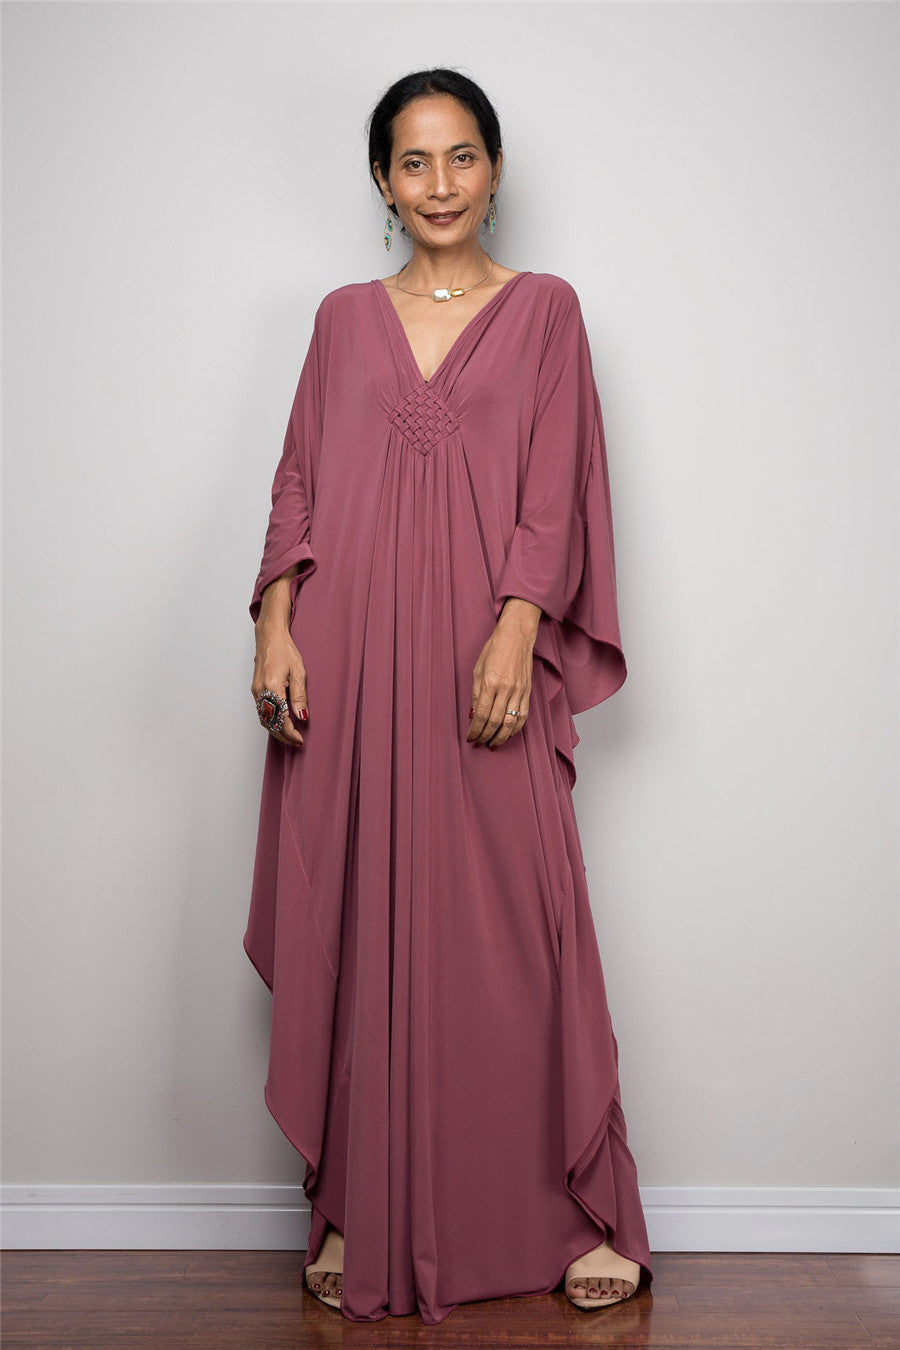 Dress  | Free Size  Chest Woven Loose Plus Size Beach Cover-up Robe Vacation | Dark Rose Red |  Free Size| thecurvestory.myshopify.com